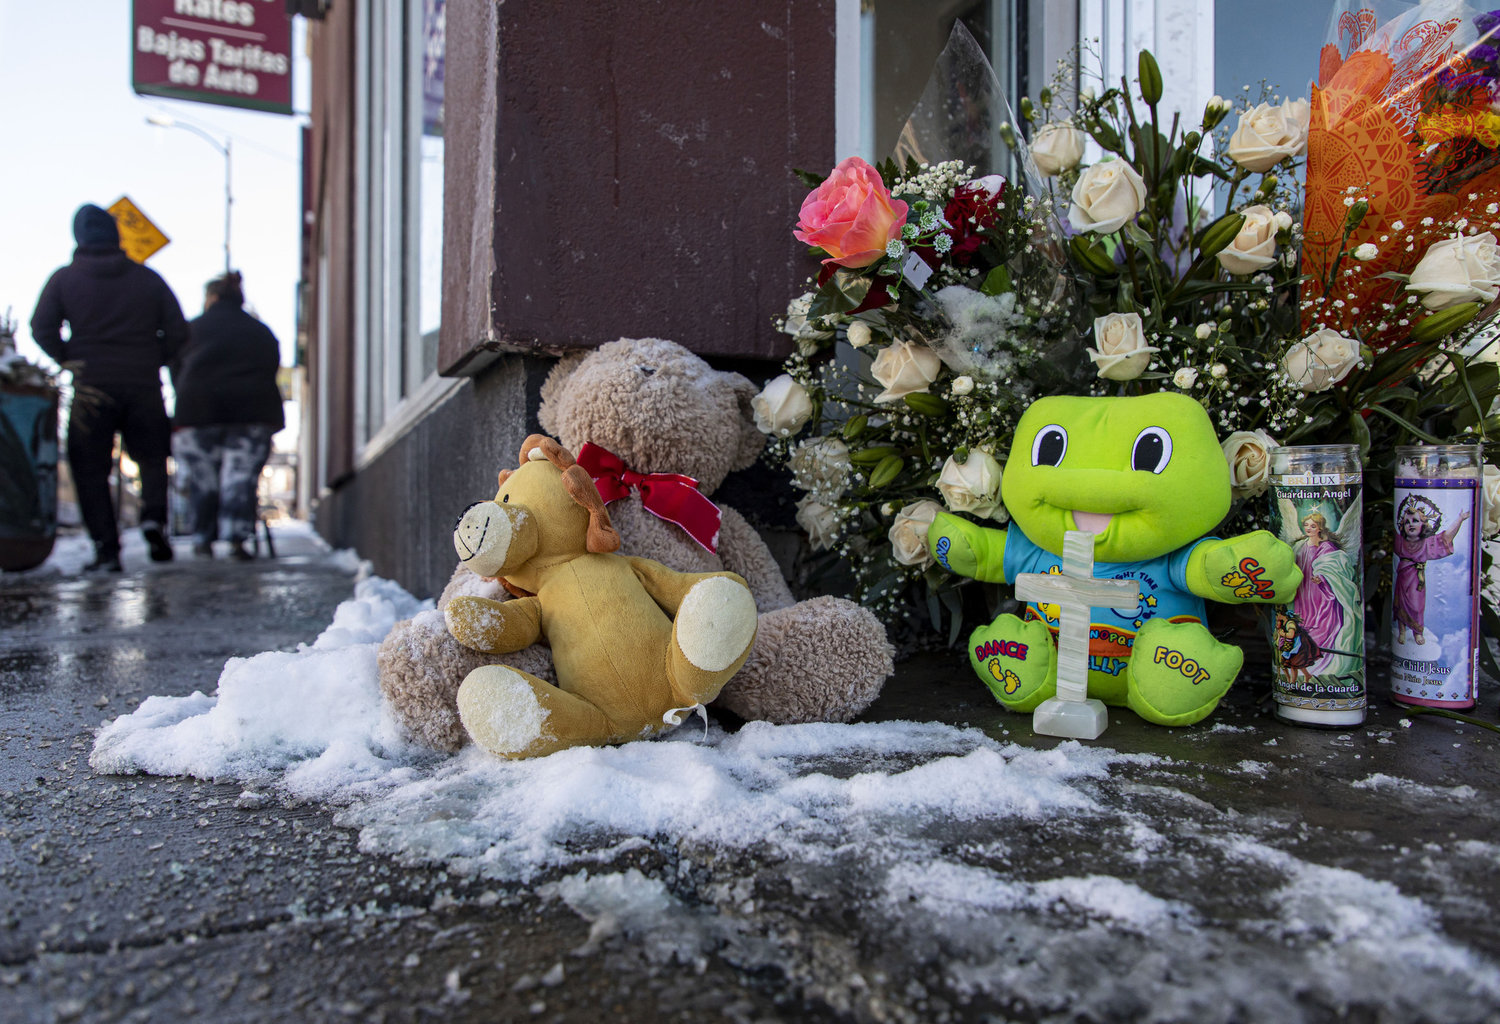 A memorial is left for 8-year-old Melissa Ortega on Sunday, Jan. 23, 2022, at the scene of her fatal shooting in the 3900 block of West 26th Street in Little Village. (Brian Cassella/Chicago Tribune/TNS)